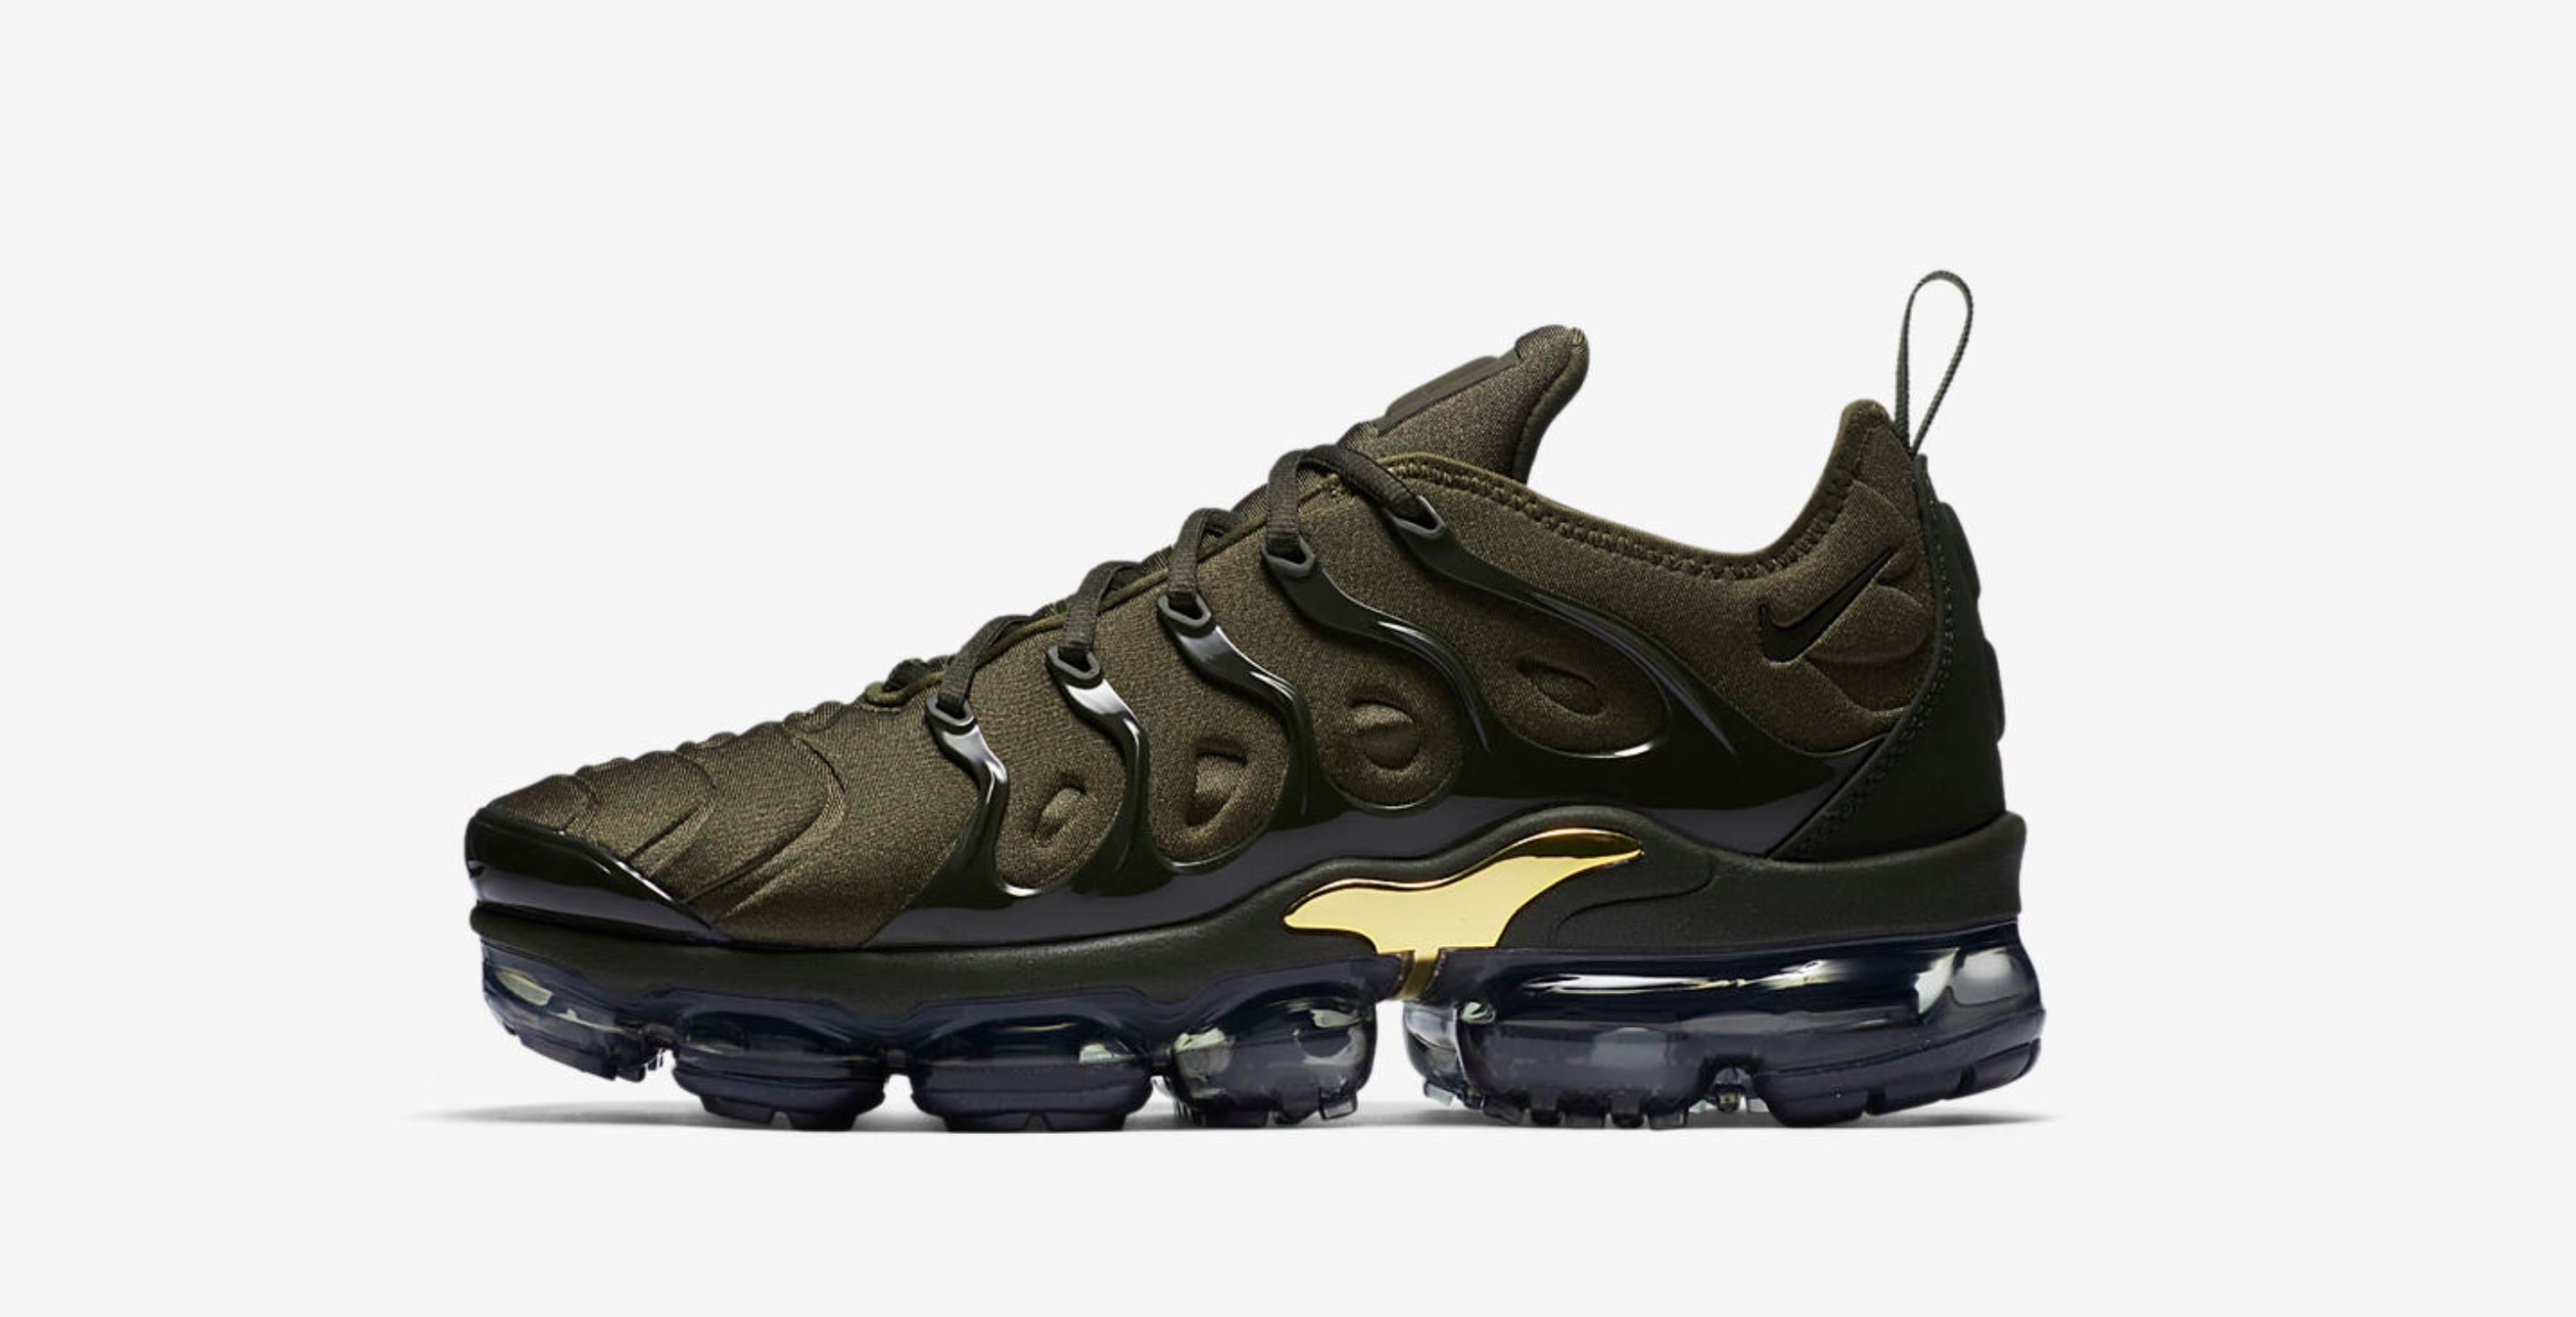 The Nike Air VaporMax Plus 'Olive' Drops Next Week - WearTesters